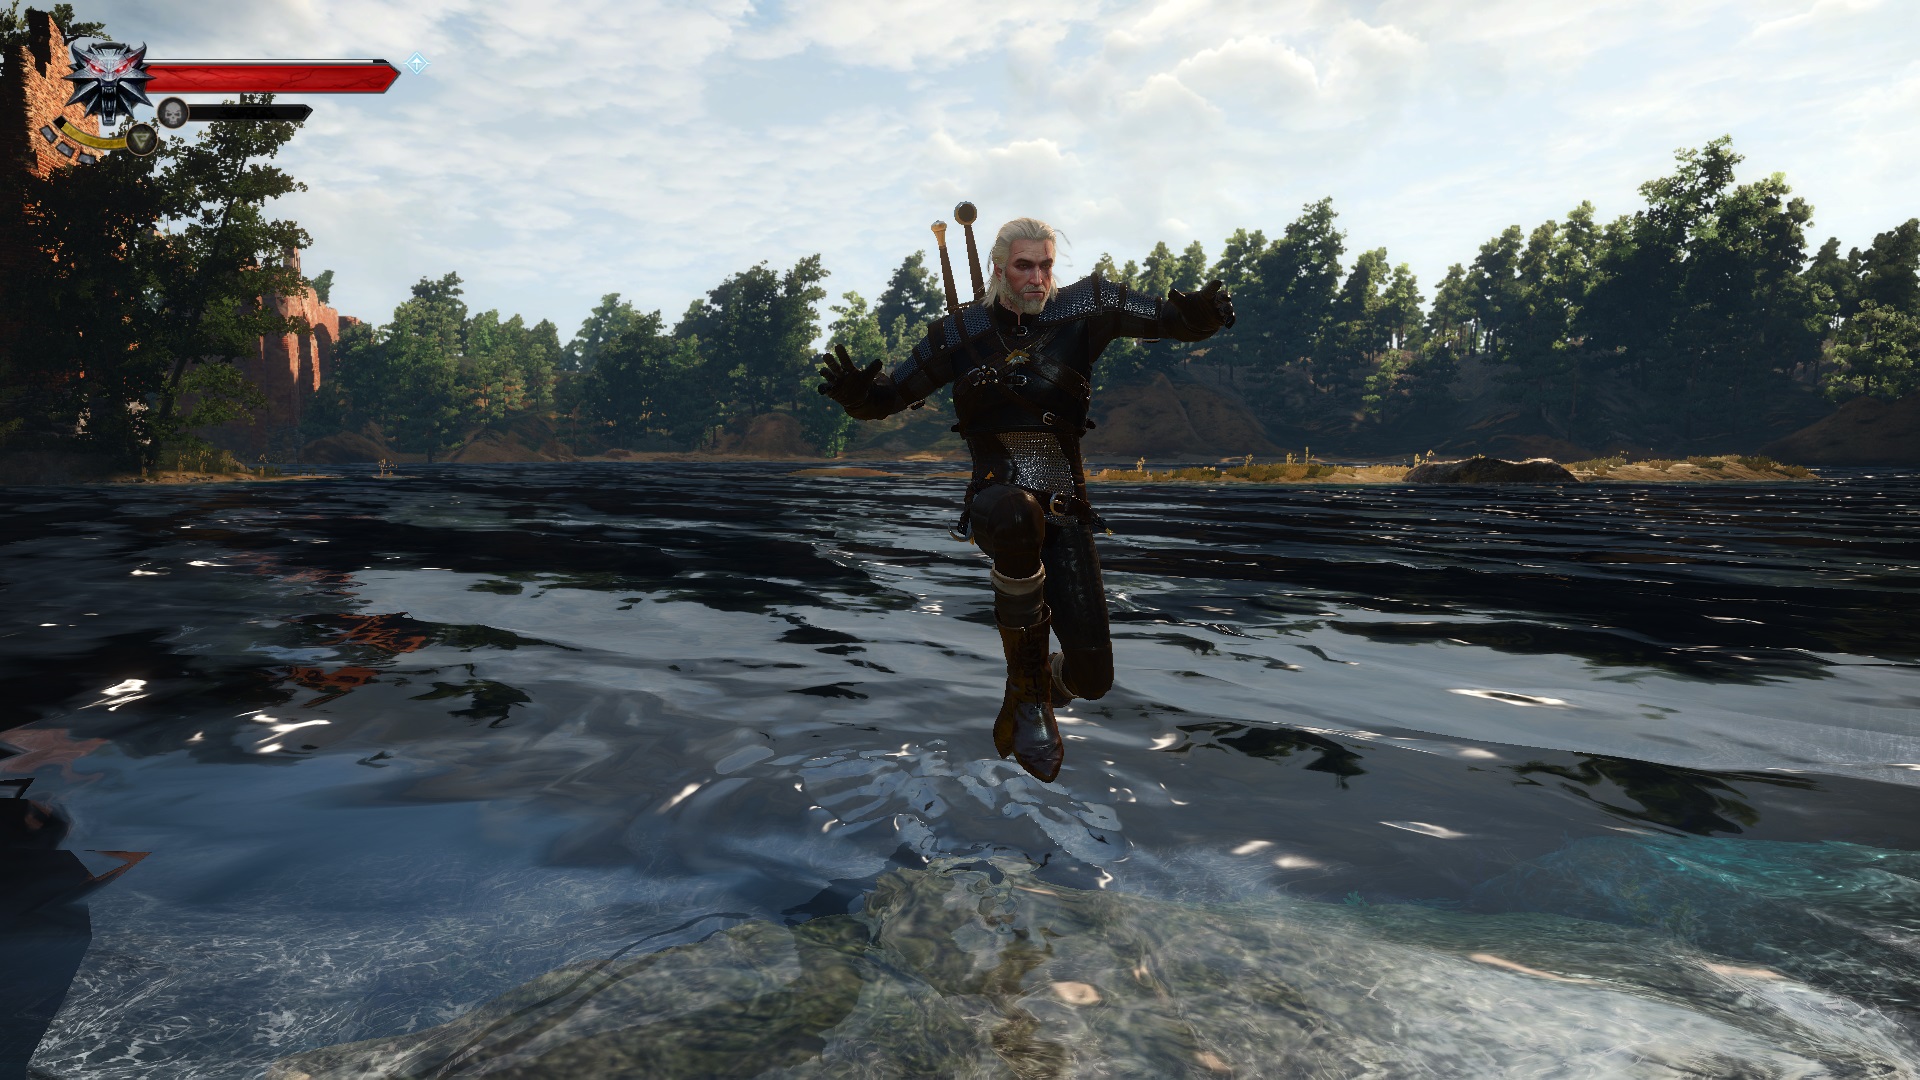 Best Witcher 3 Mods - Jump in shallow water